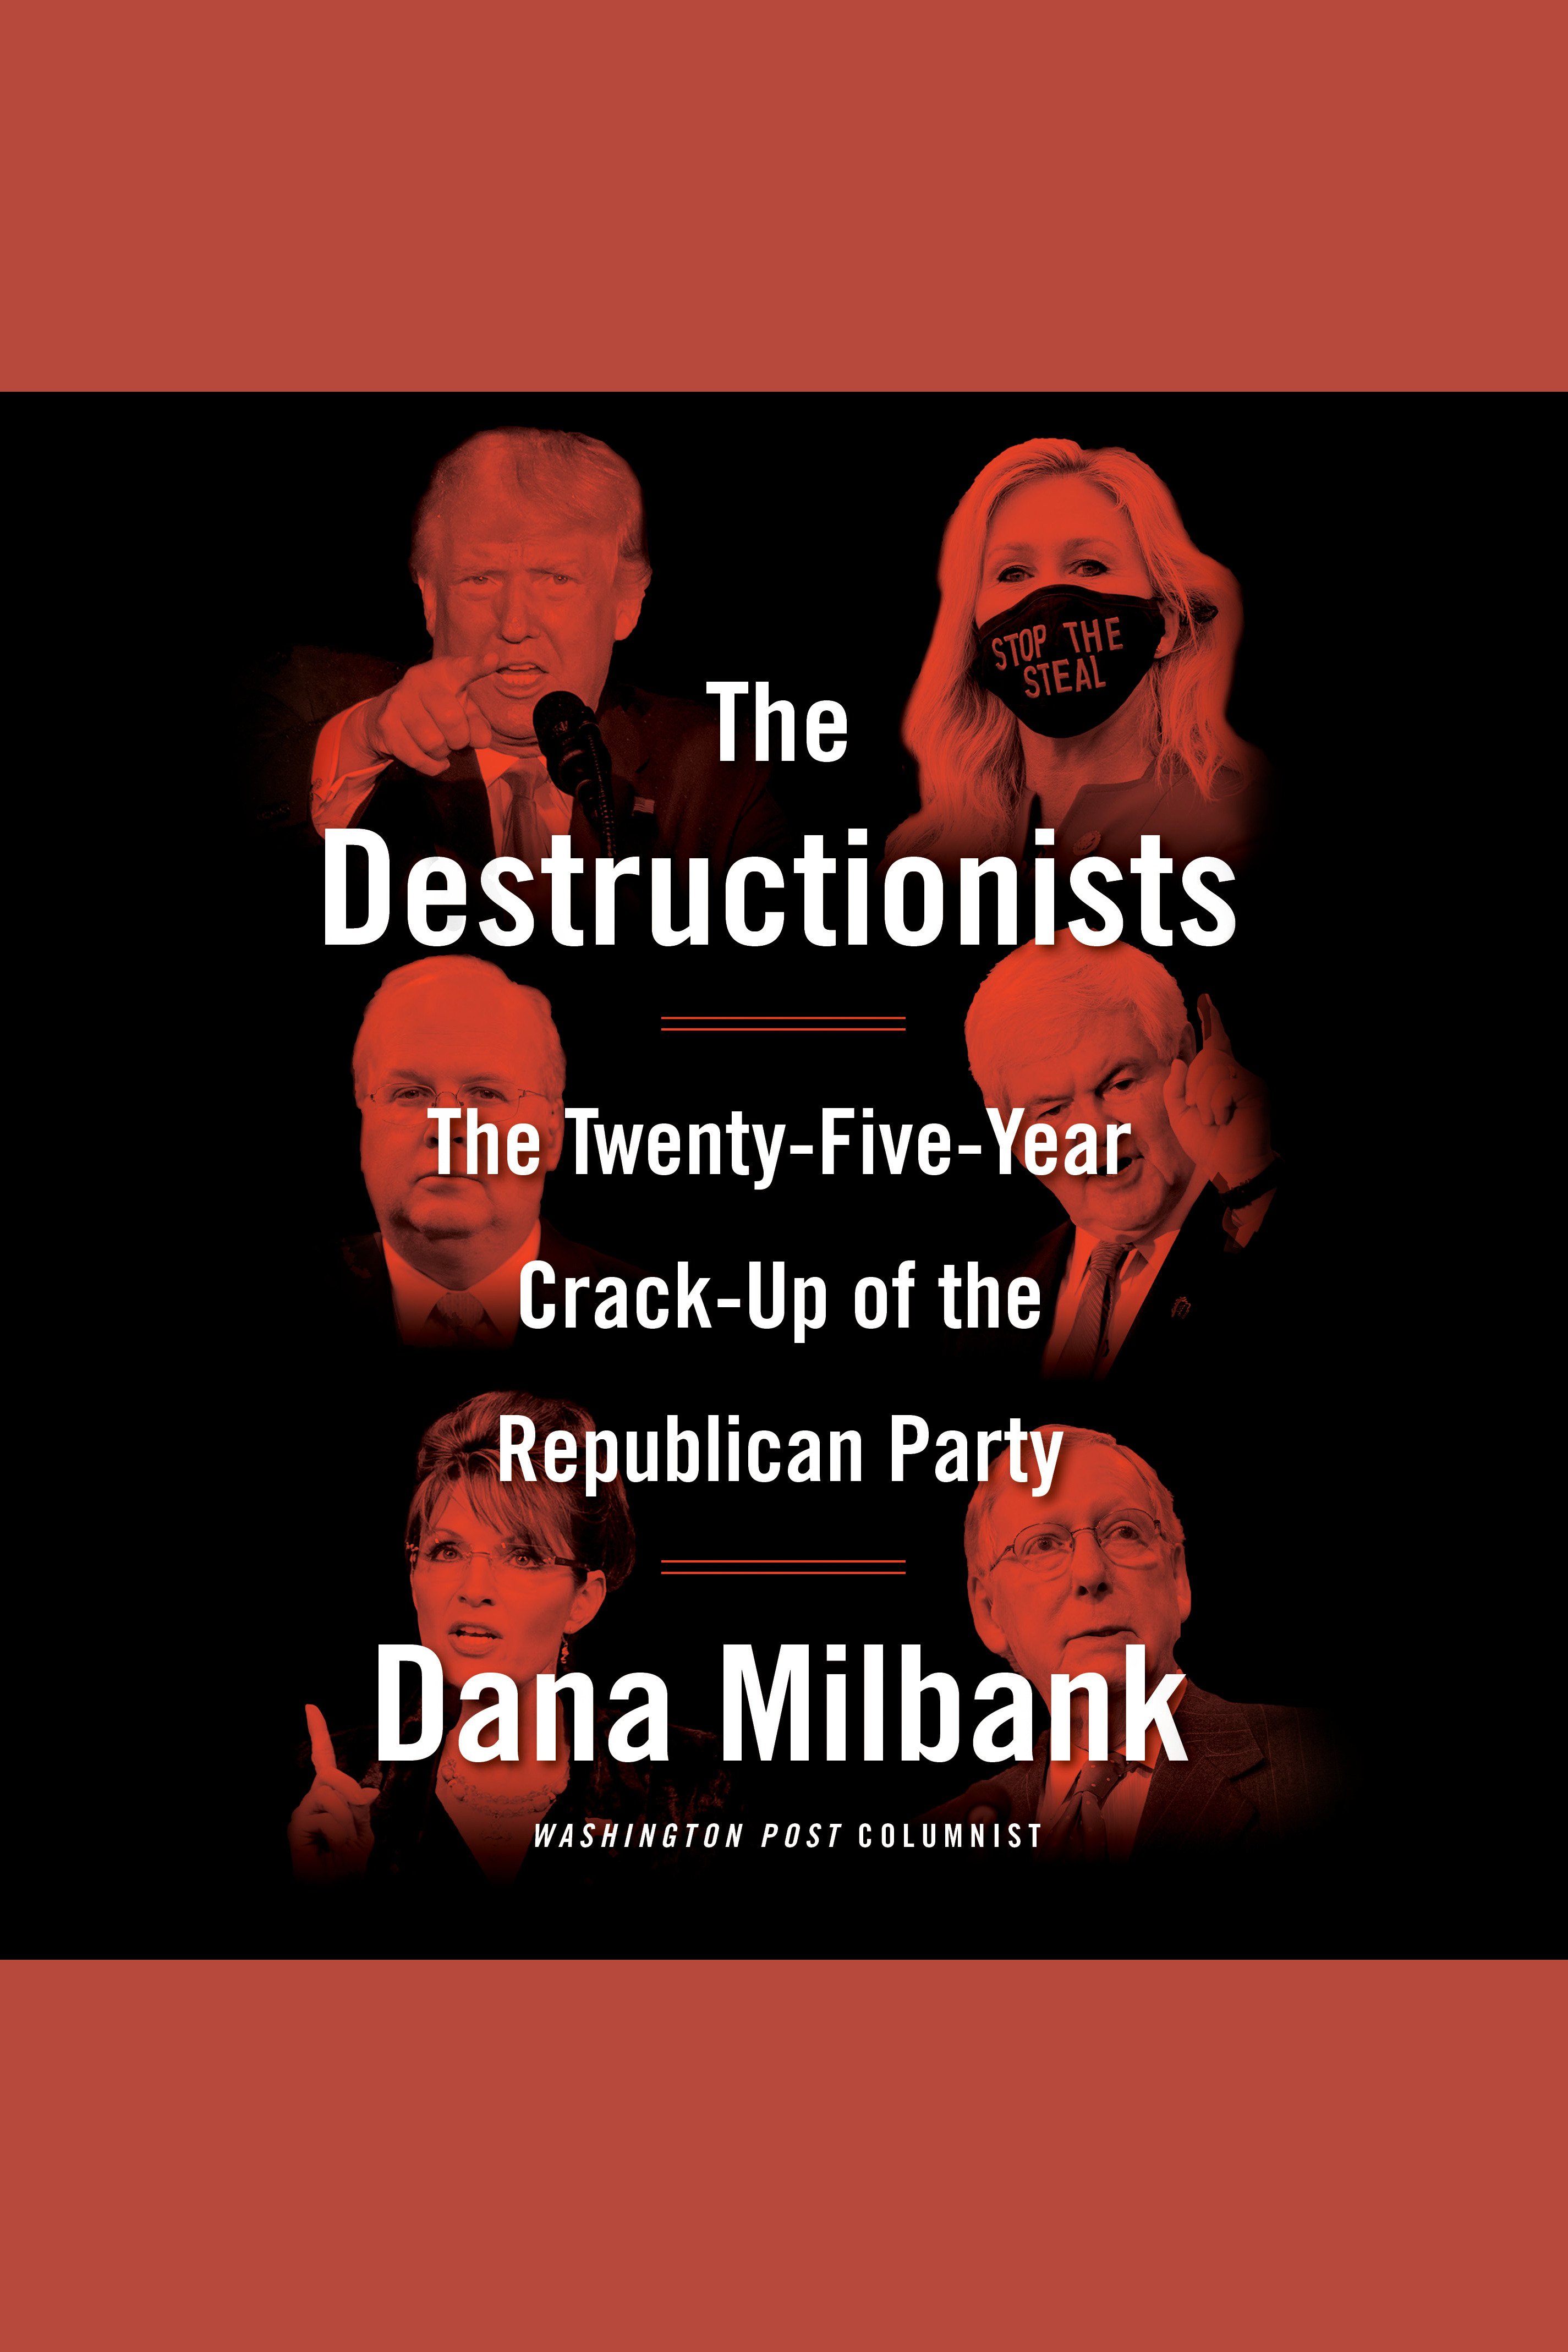 The Destructionists The Twenty-Five Year Crack-Up of the Republican Party cover image